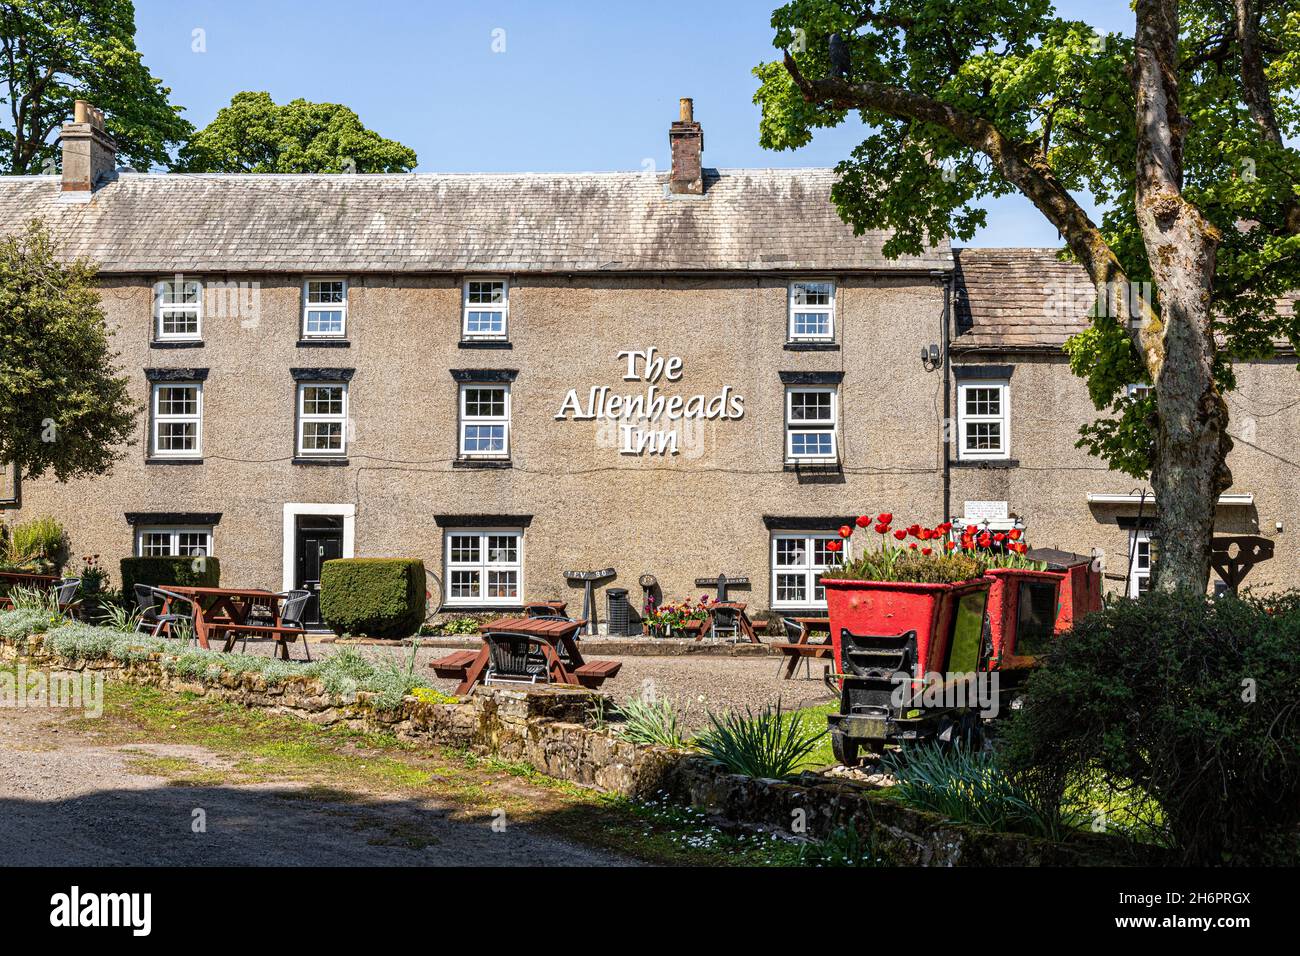 The Allenheads Inn in the former mining village of Allenheads in the Pennines to the north of Weardale, Northumberland UK Stock Photo